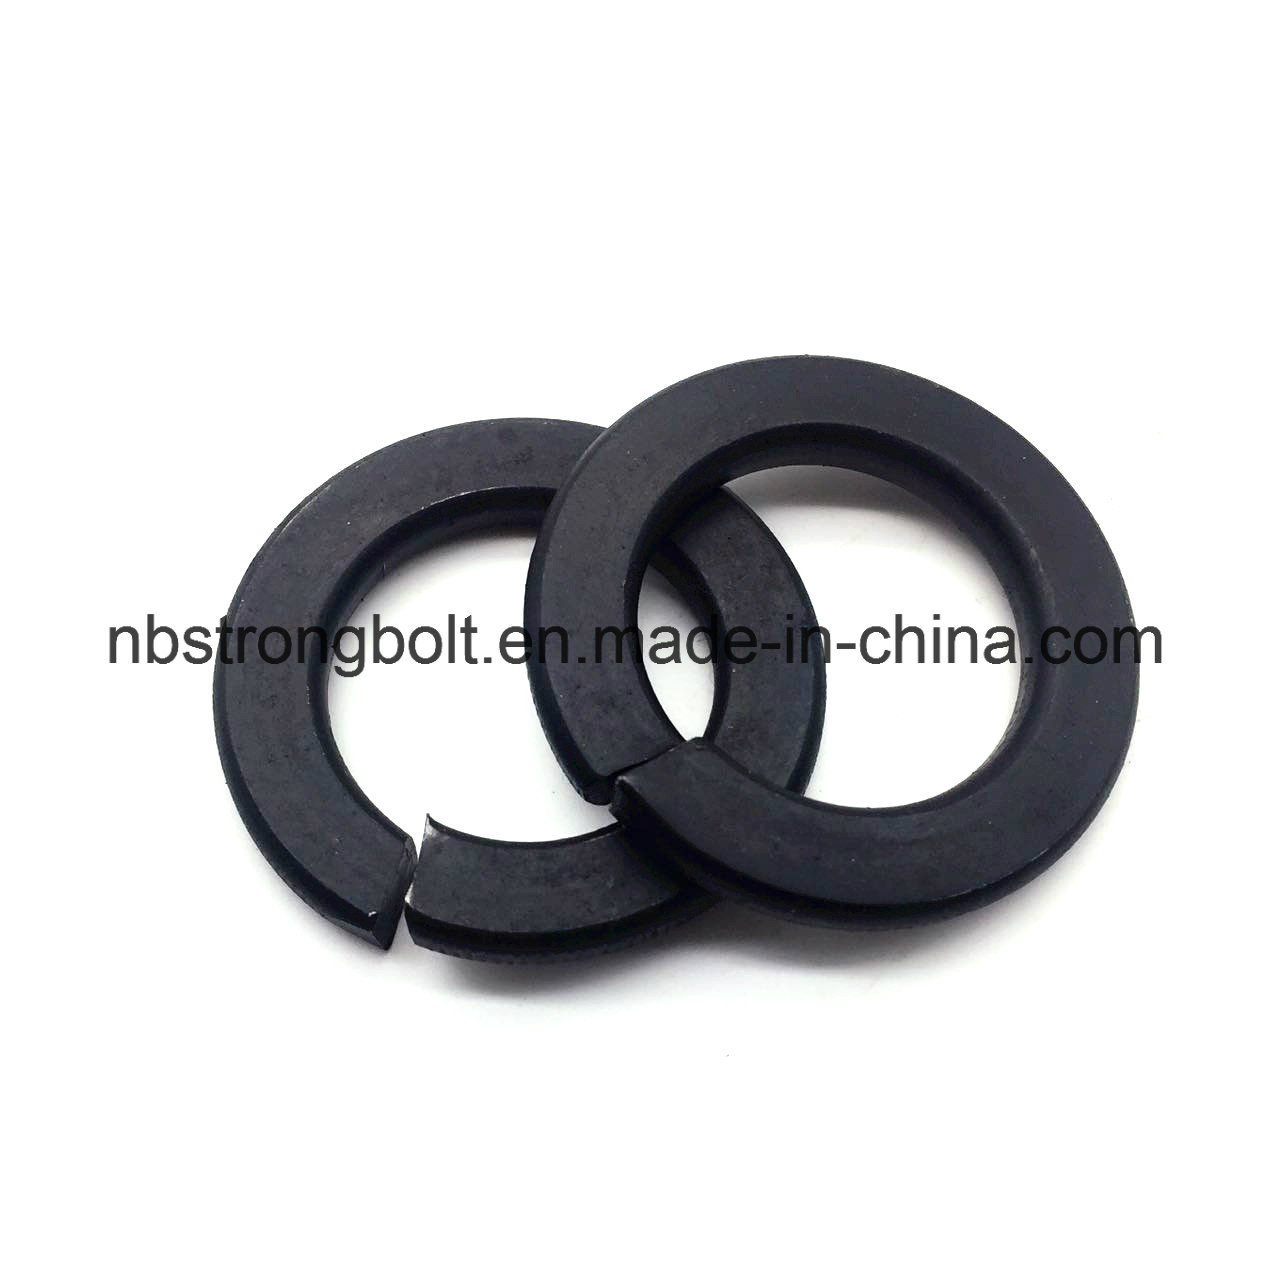 DIN127b Spring Lock Washers with Black Oxid M8